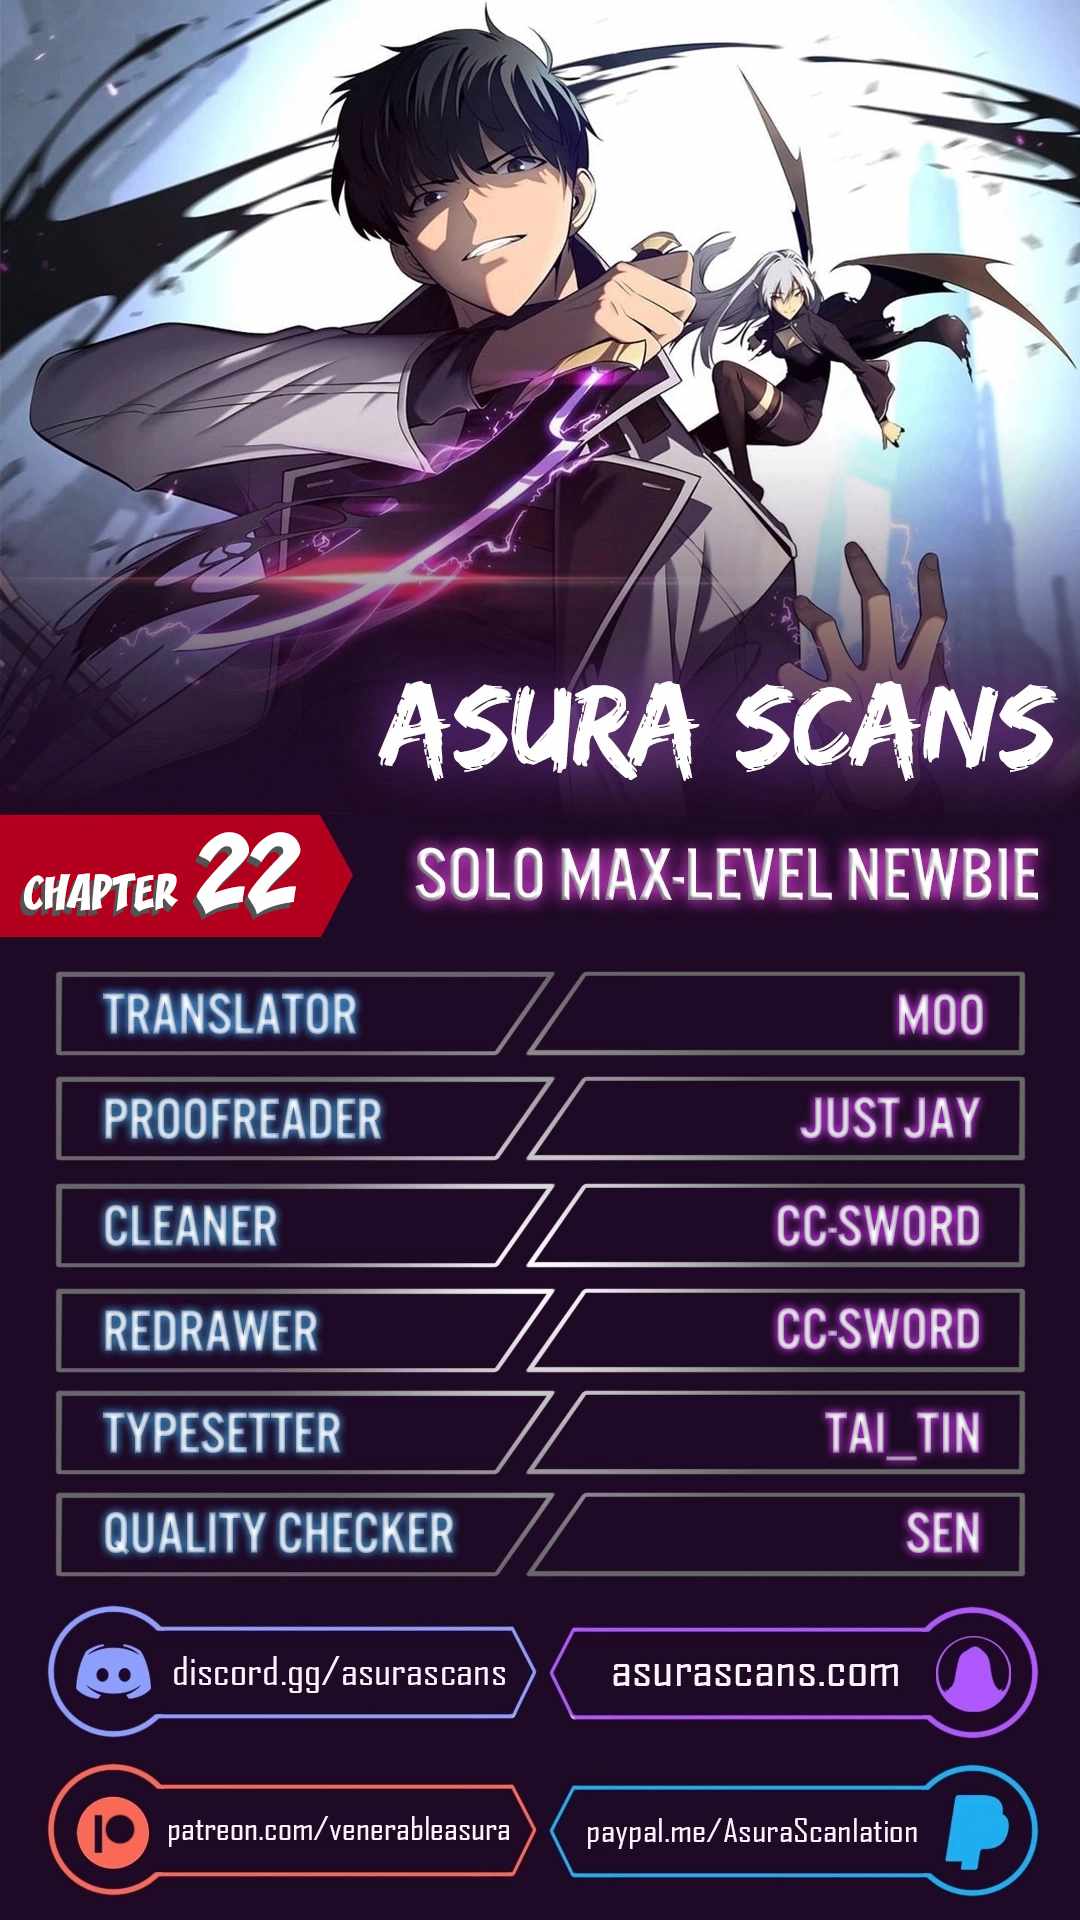 Solo Max-Level Newbie chapter 22